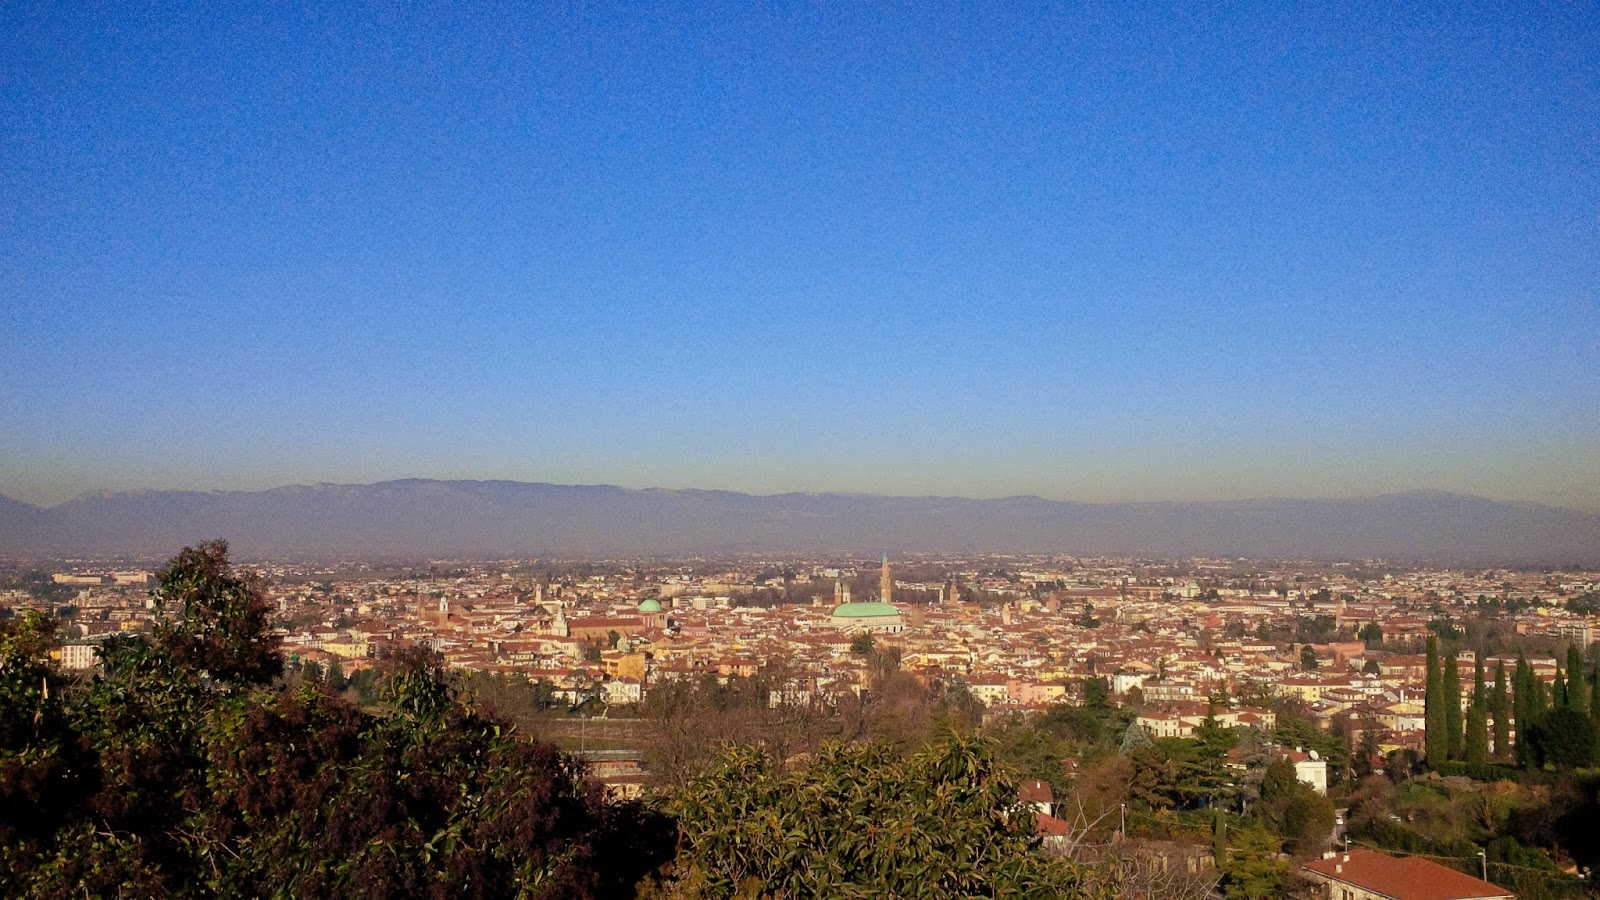 Vicenza seen from Monte Berico